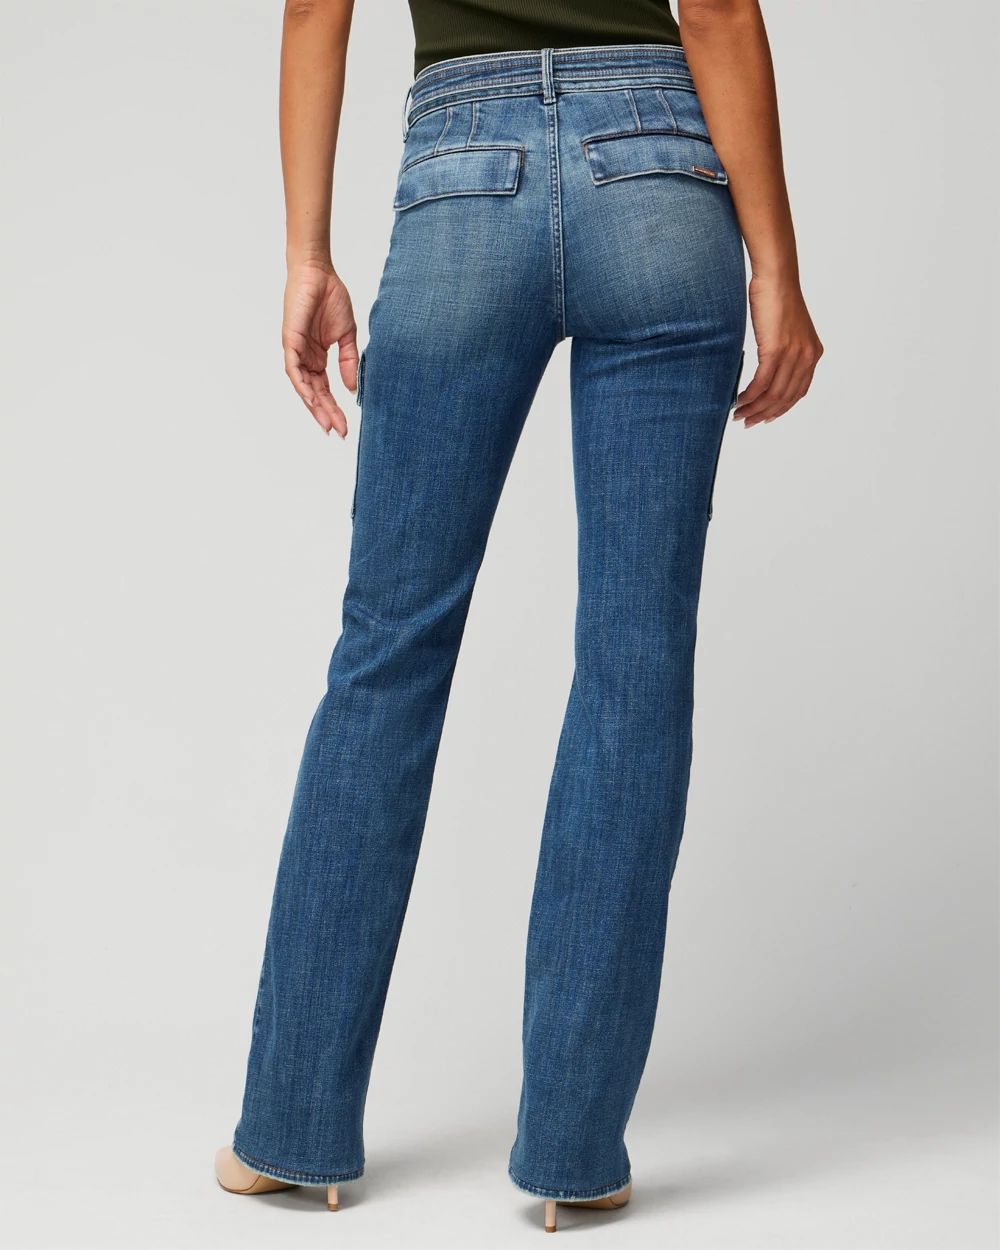 High-Rise Cargo Bootcut Jeans click to view larger image.